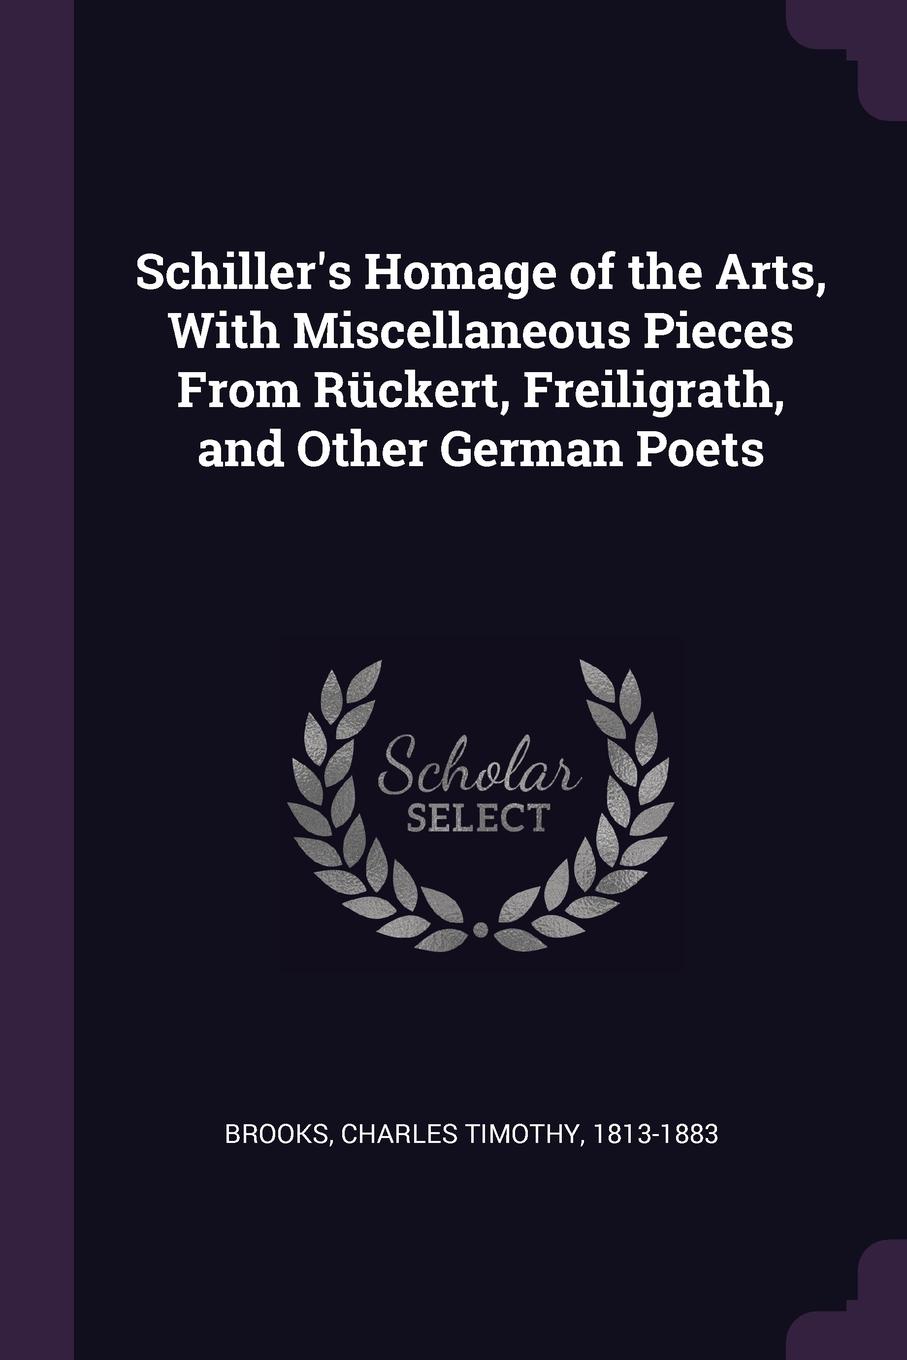 Schiller.s Homage of the Arts, With Miscellaneous Pieces From Ruckert, Freiligrath, and Other German Poets